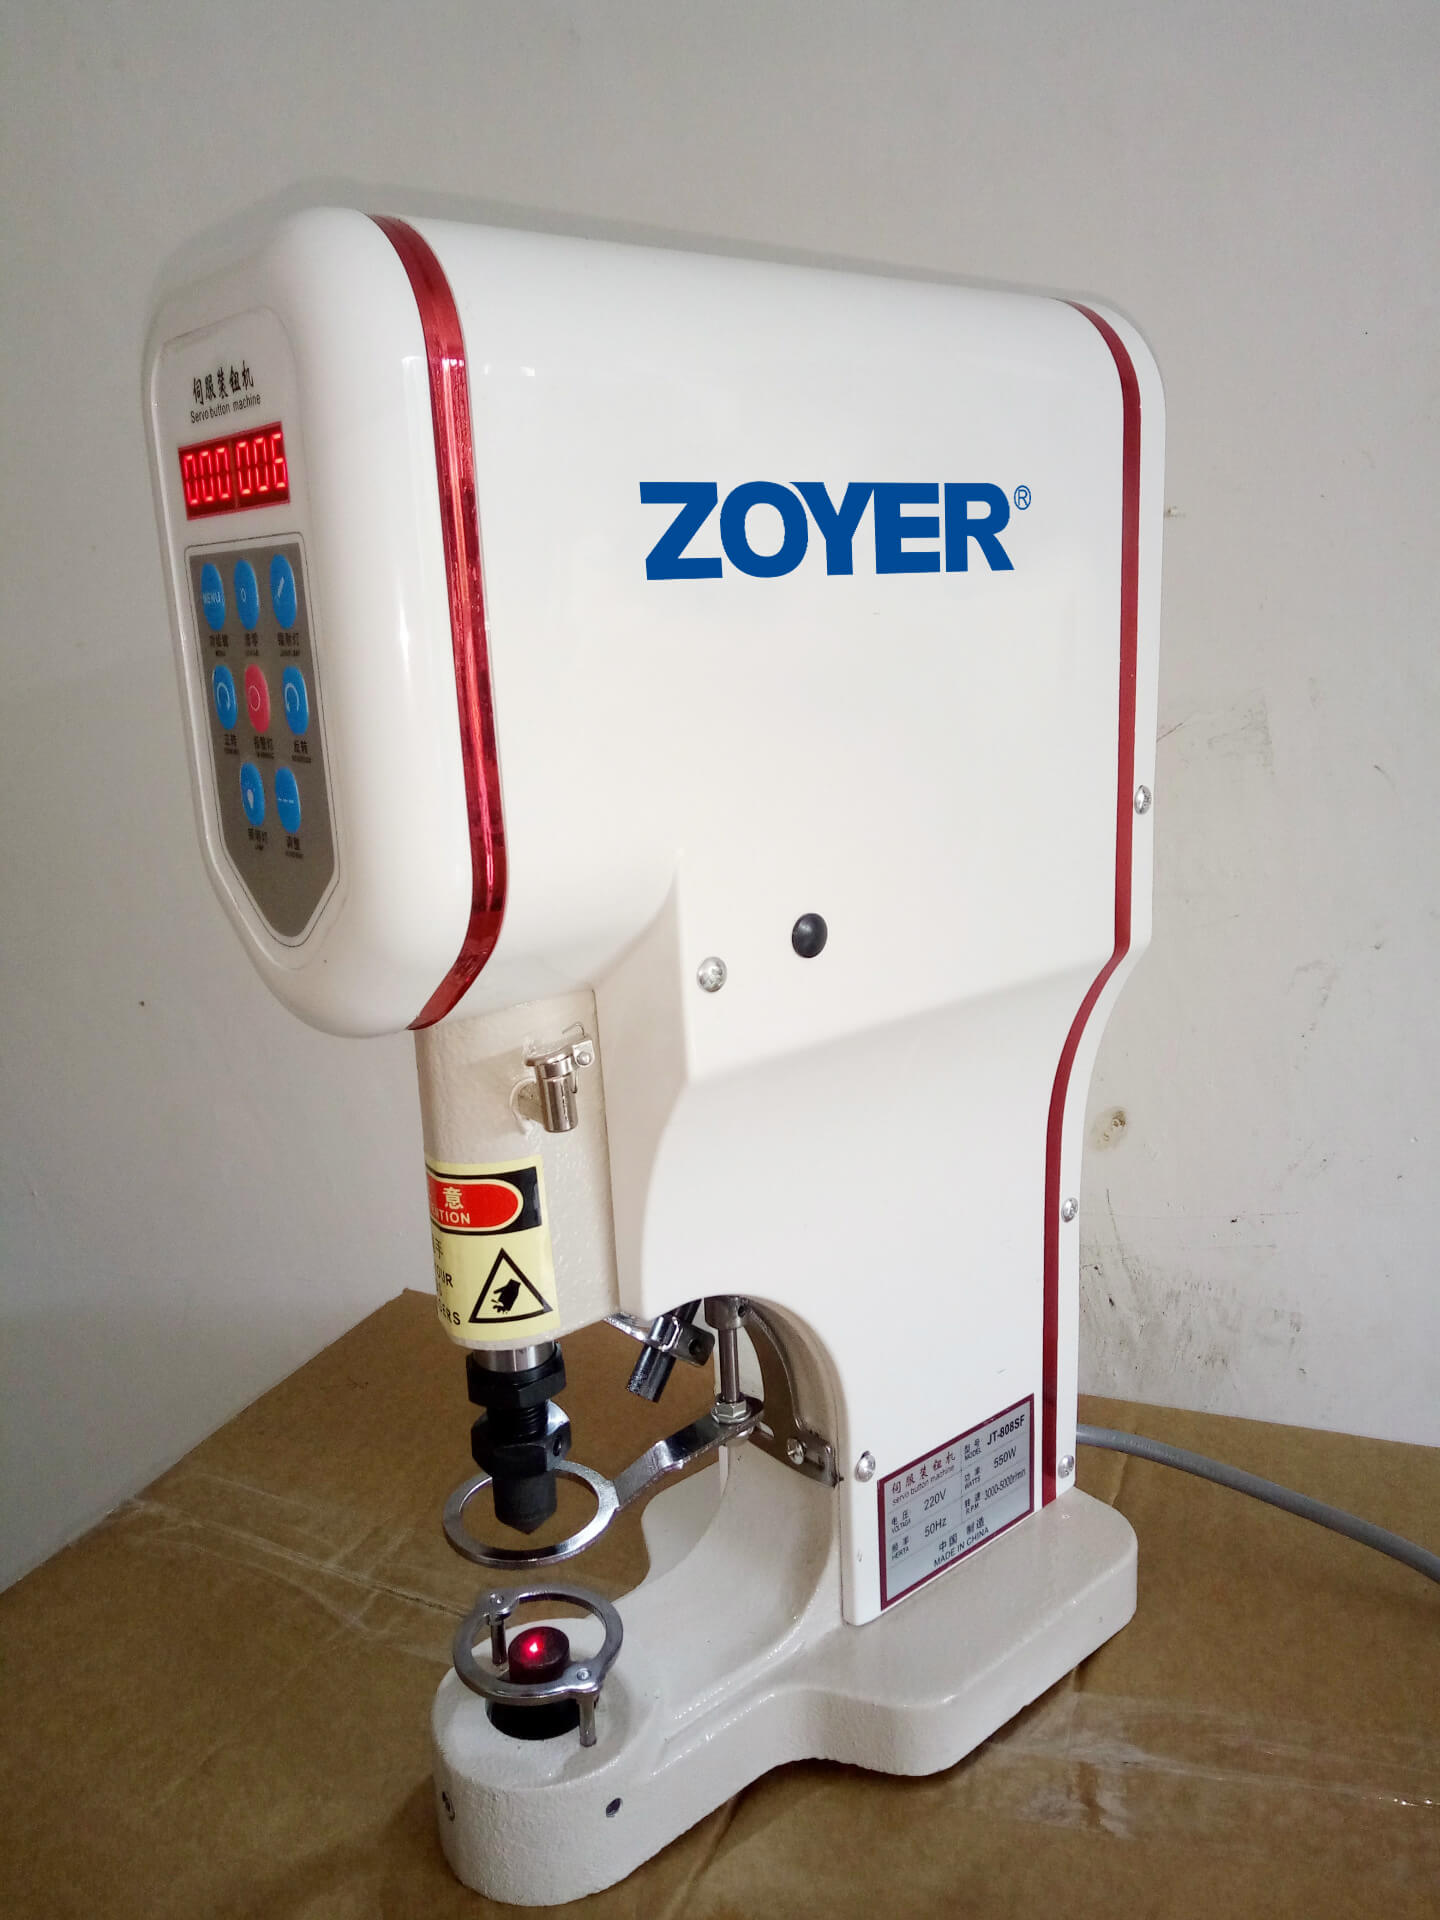 ZY828D zoyer Direct drive snap button attaching machine with infrared